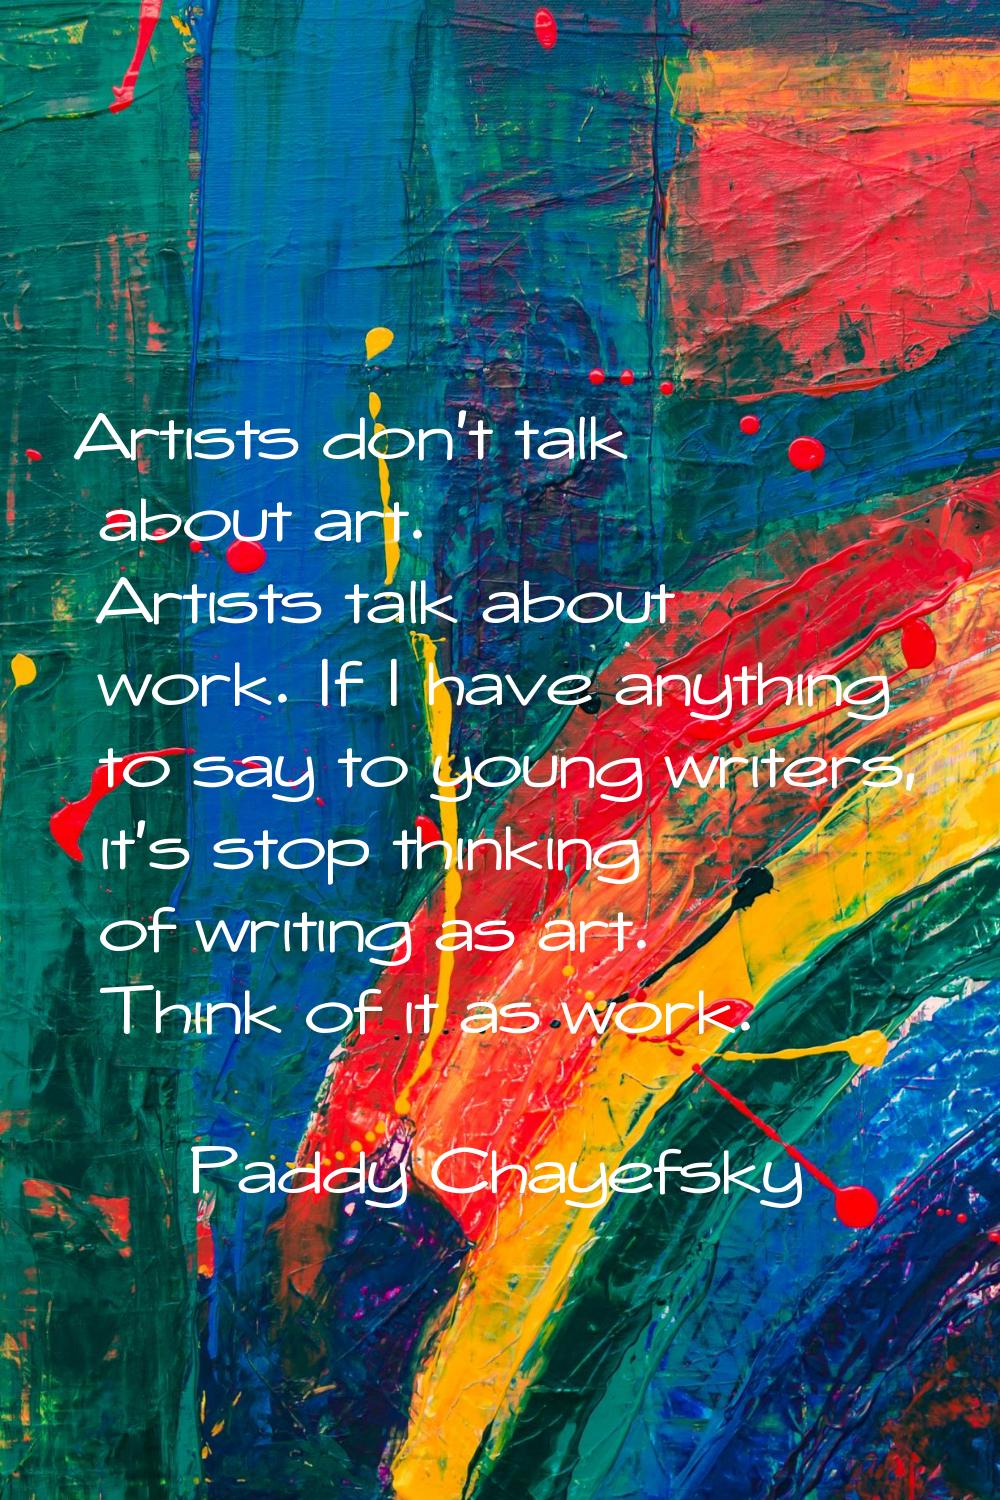 Artists don't talk about art. Artists talk about work. If I have anything to say to young writers, 